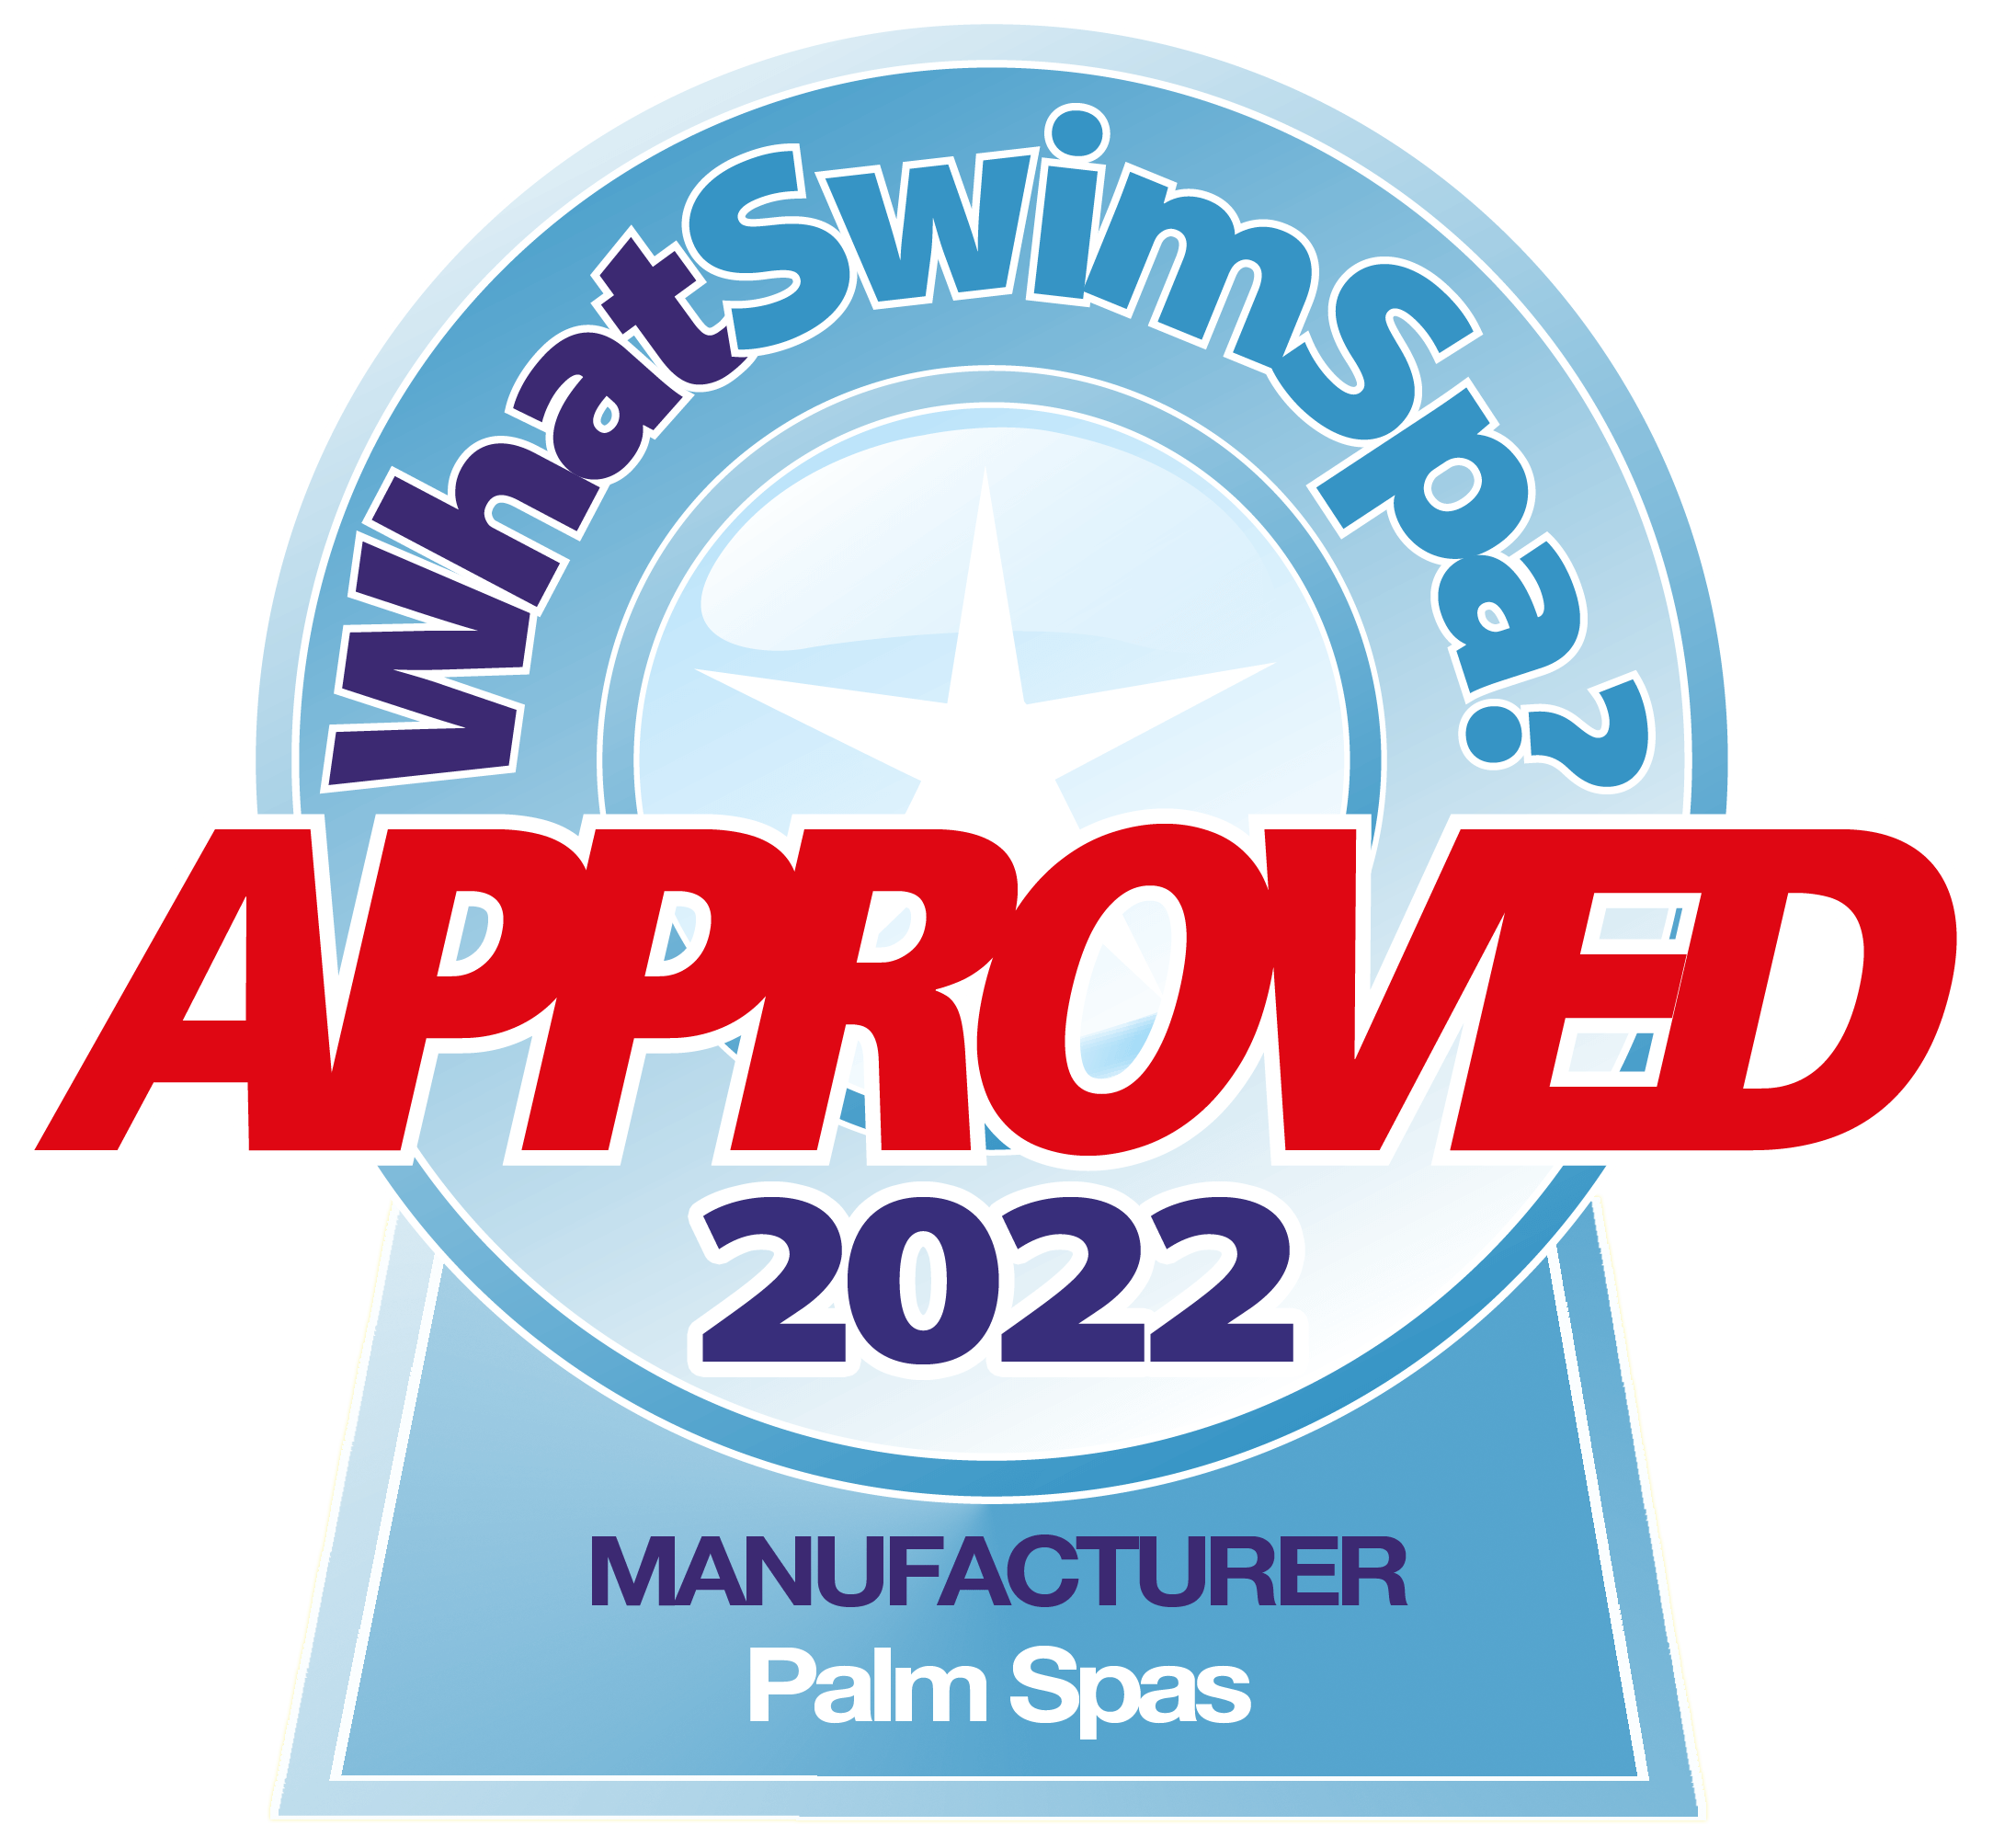 WhatSwimSpa? Approved Manufacturer 2022